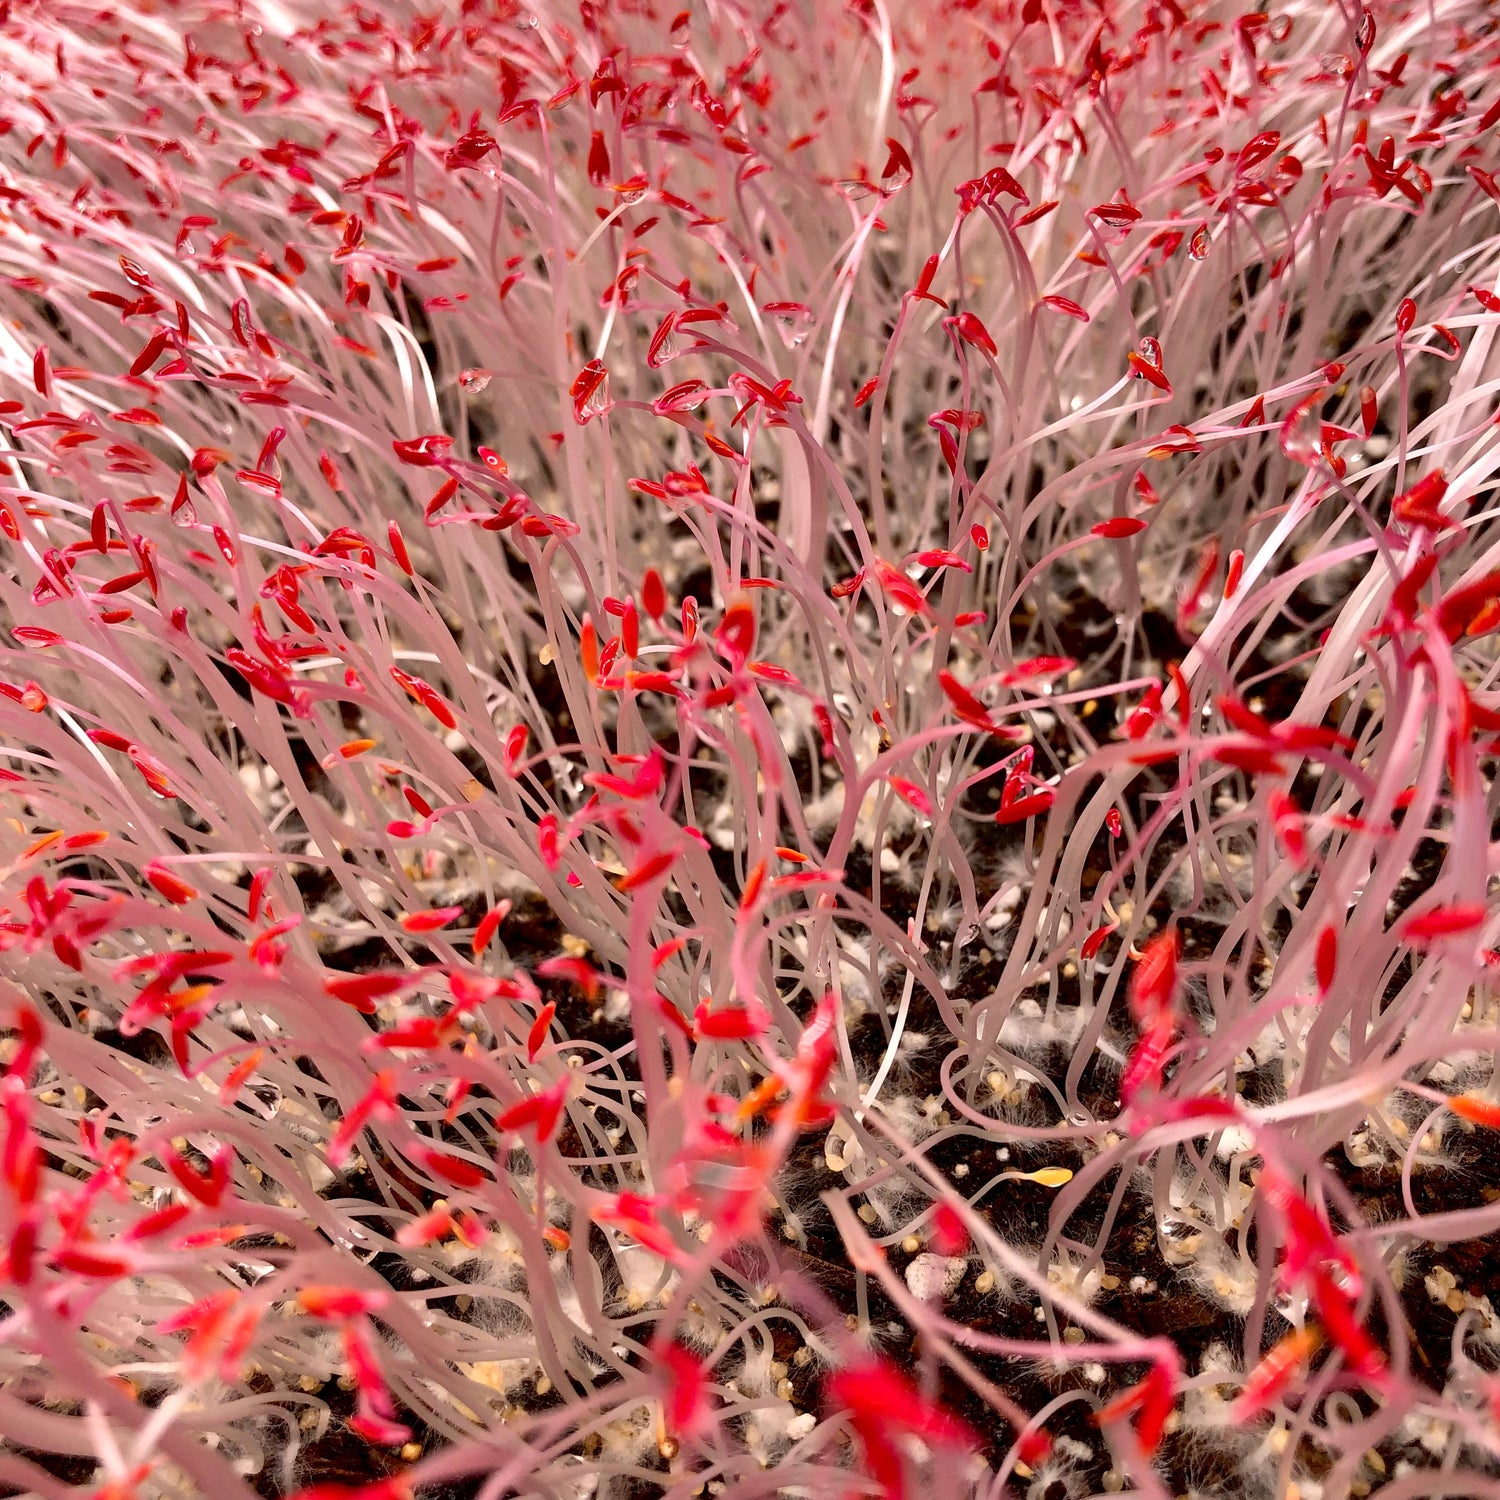 Germinating amaranth microgreens have white  stems with bright reddish pink leaves.